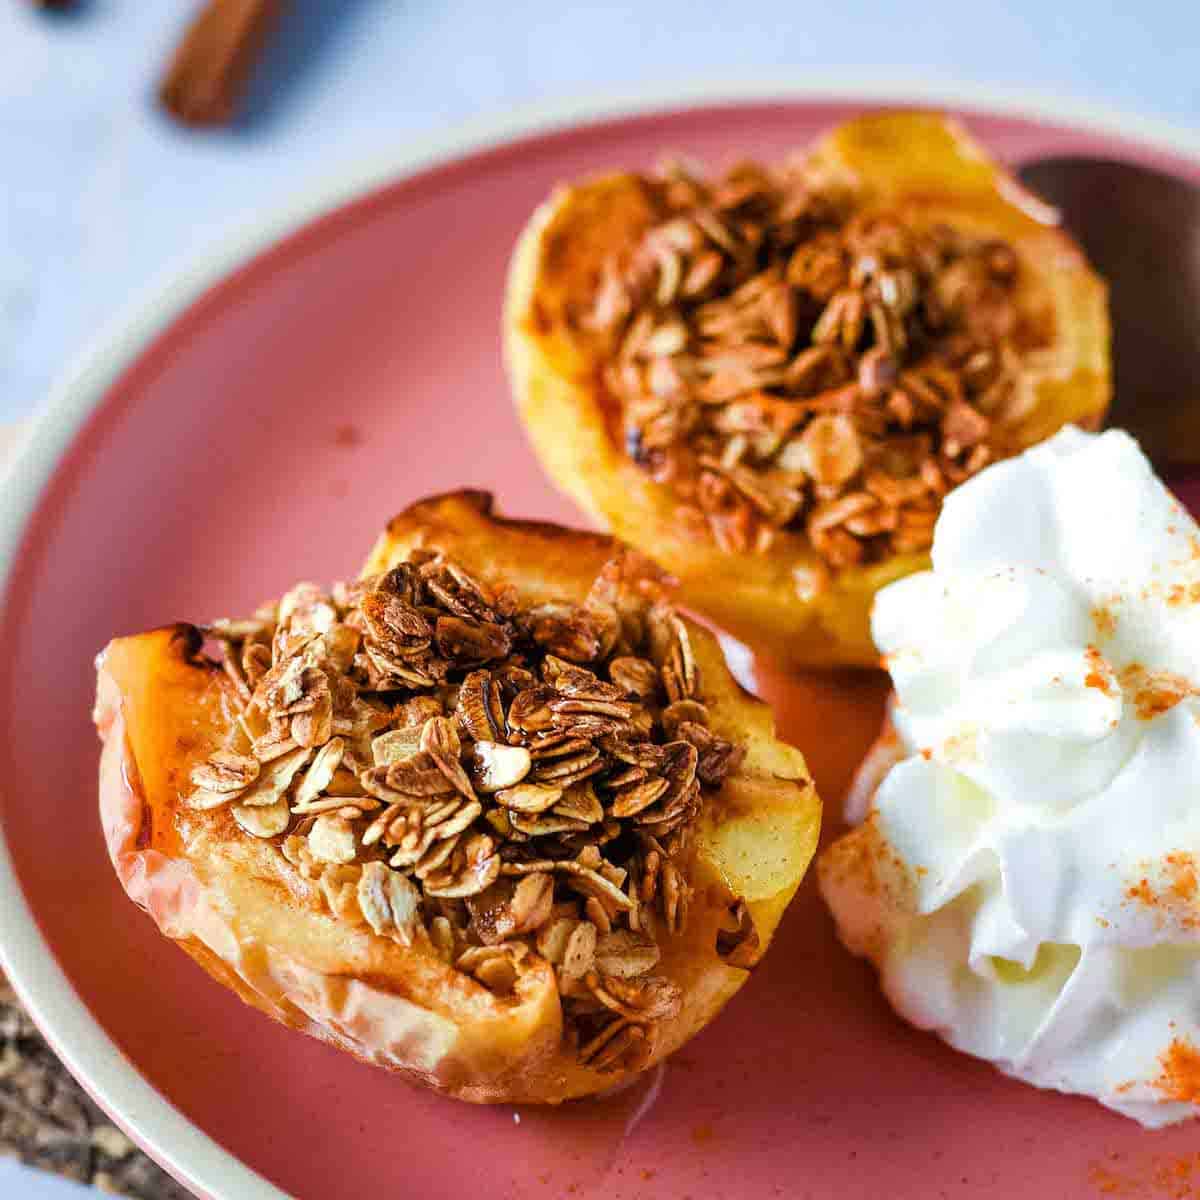 Two baked air fryer apple haves are shown on a pink plate with whipped cream.